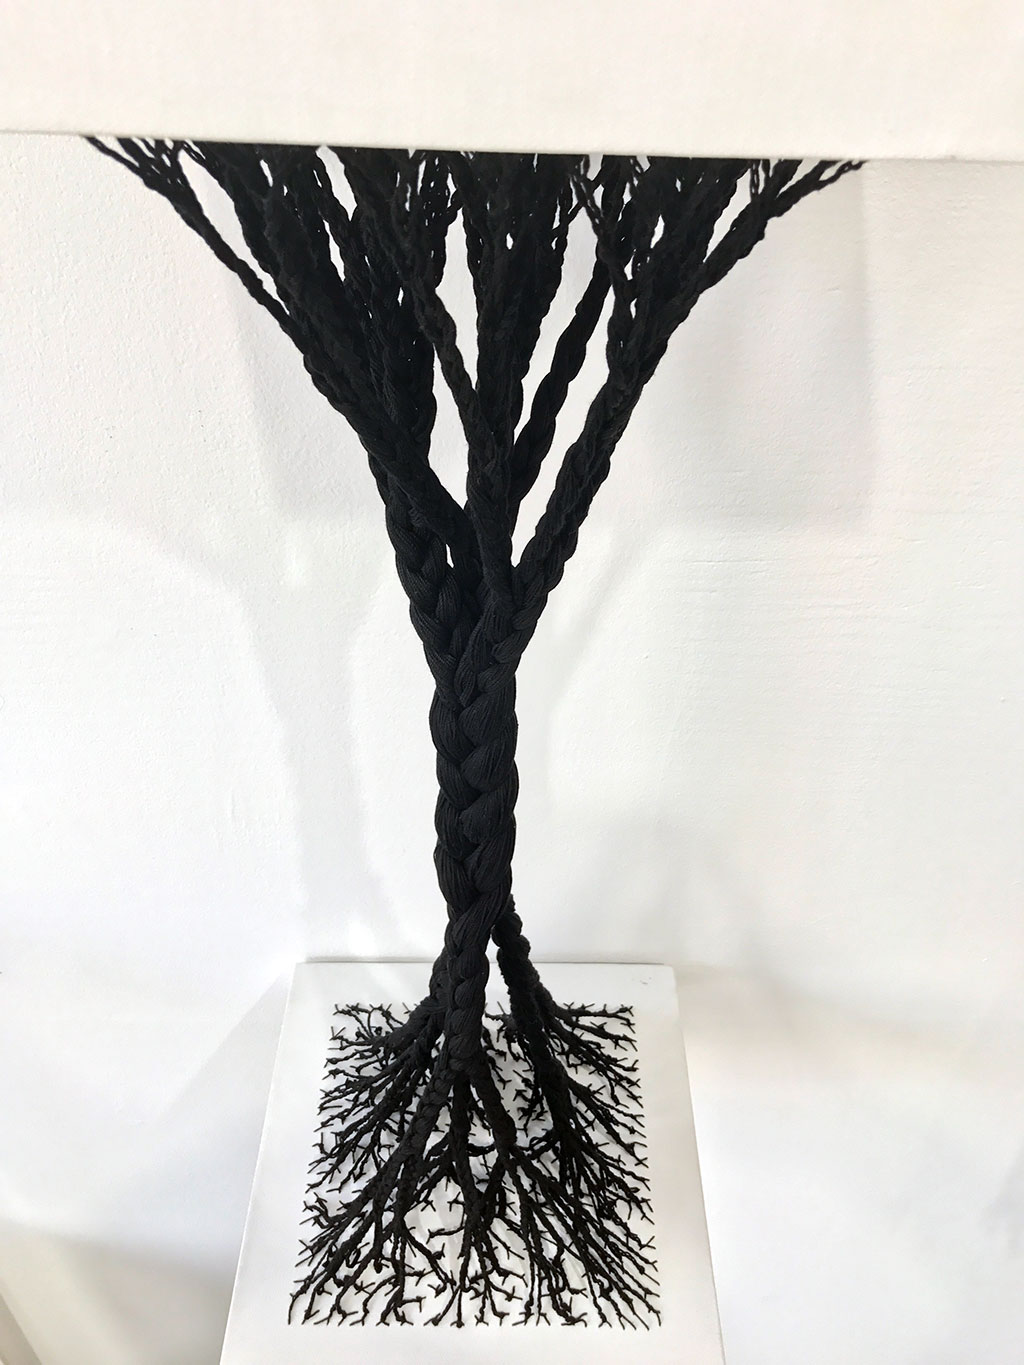 Sonya Clark, Rooted and Uprooted, 2017